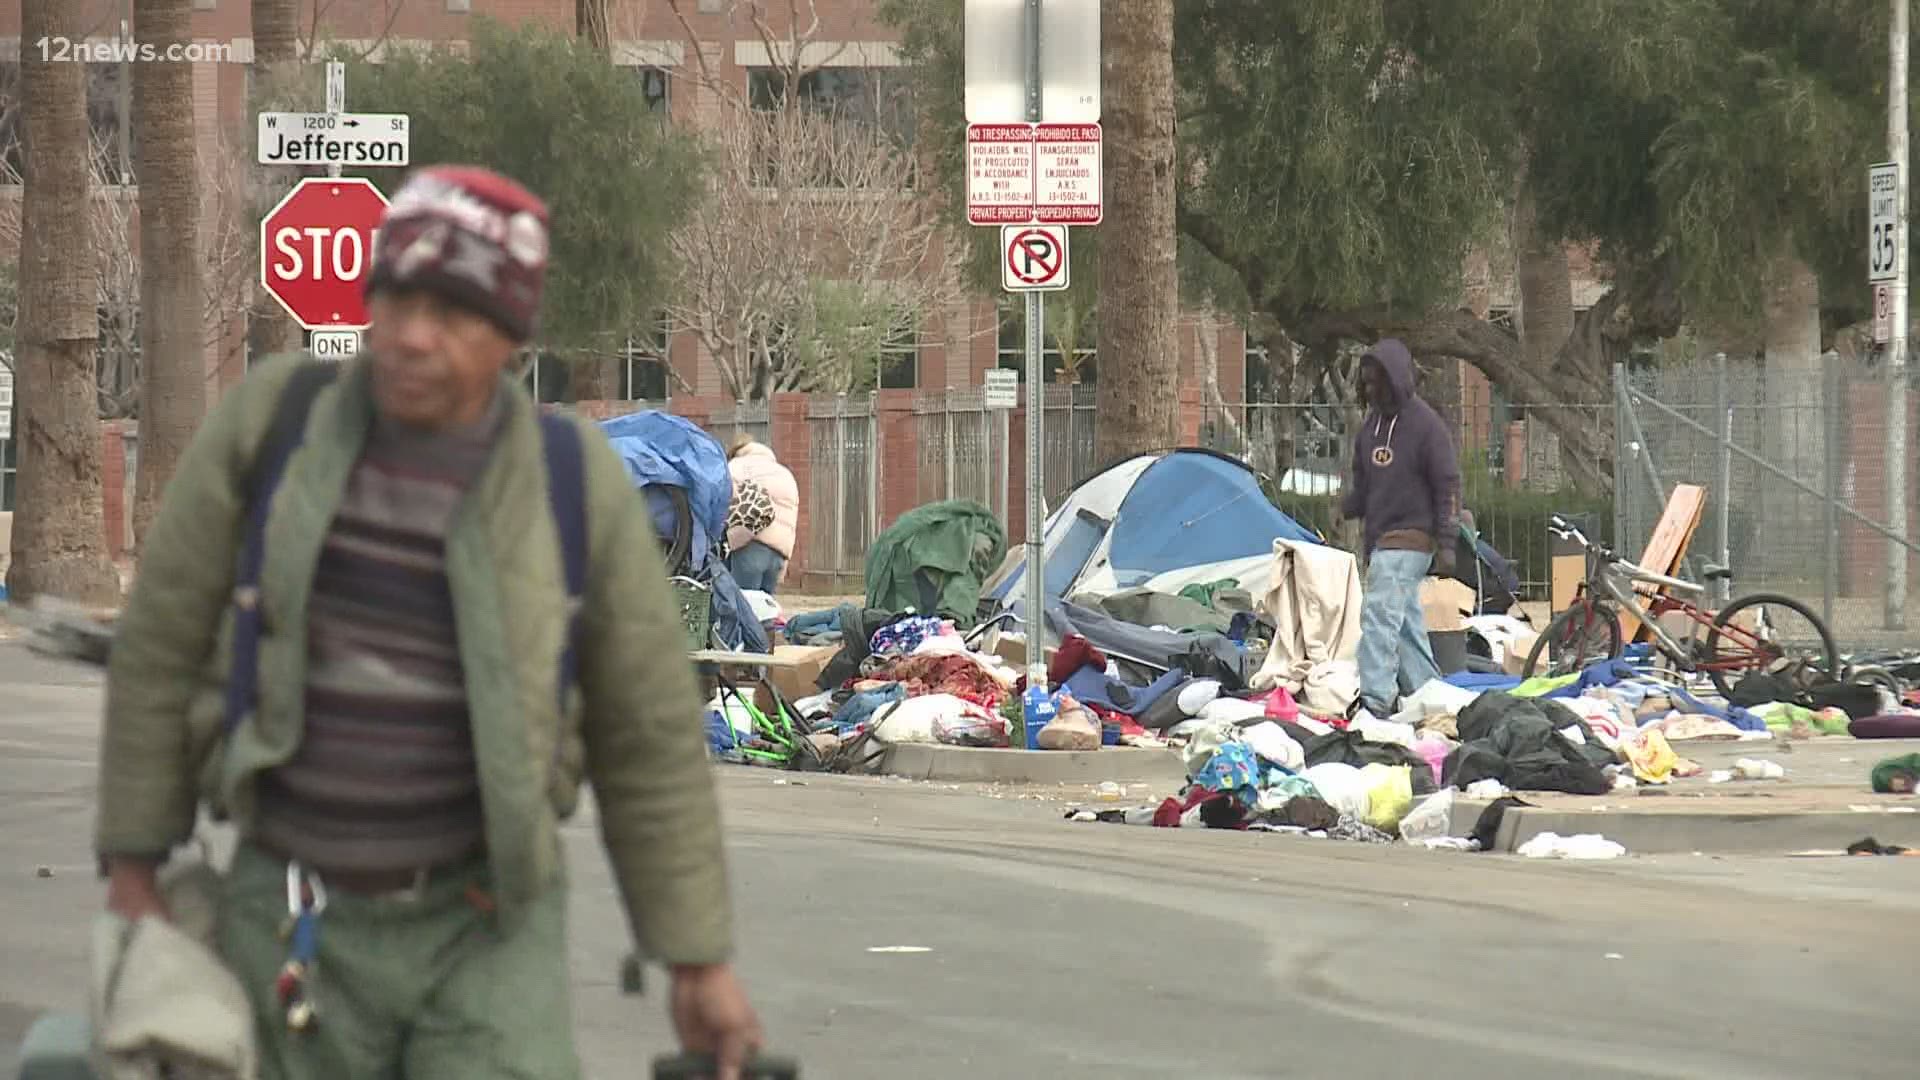 For the first time in the county's history, there were more people living on the streets of Maricopa County than there were in shelters, according to a new report.